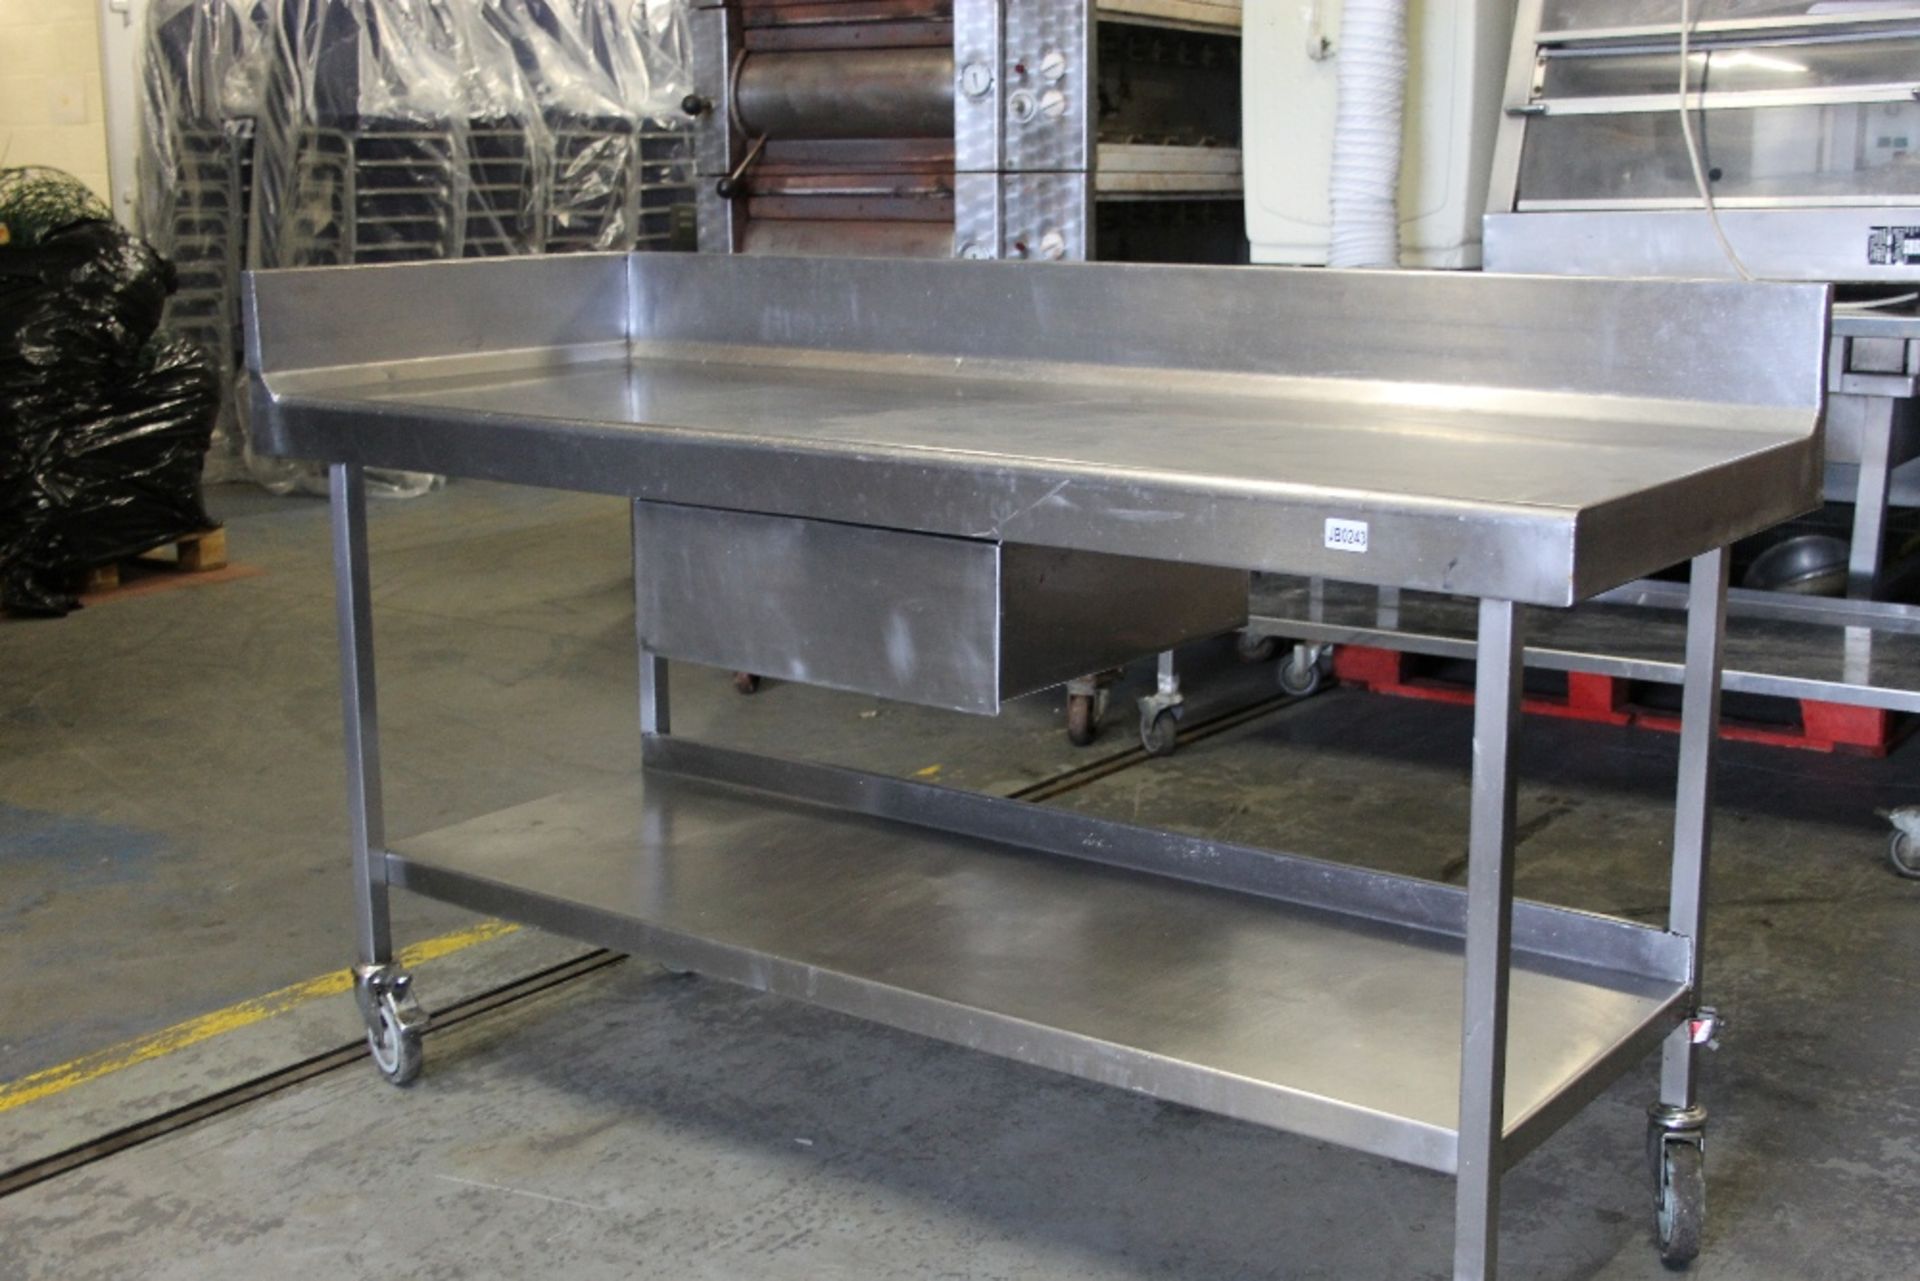 Stainless Steel Table 5ft 7” with one Drawer + Splash back - Image 2 of 3